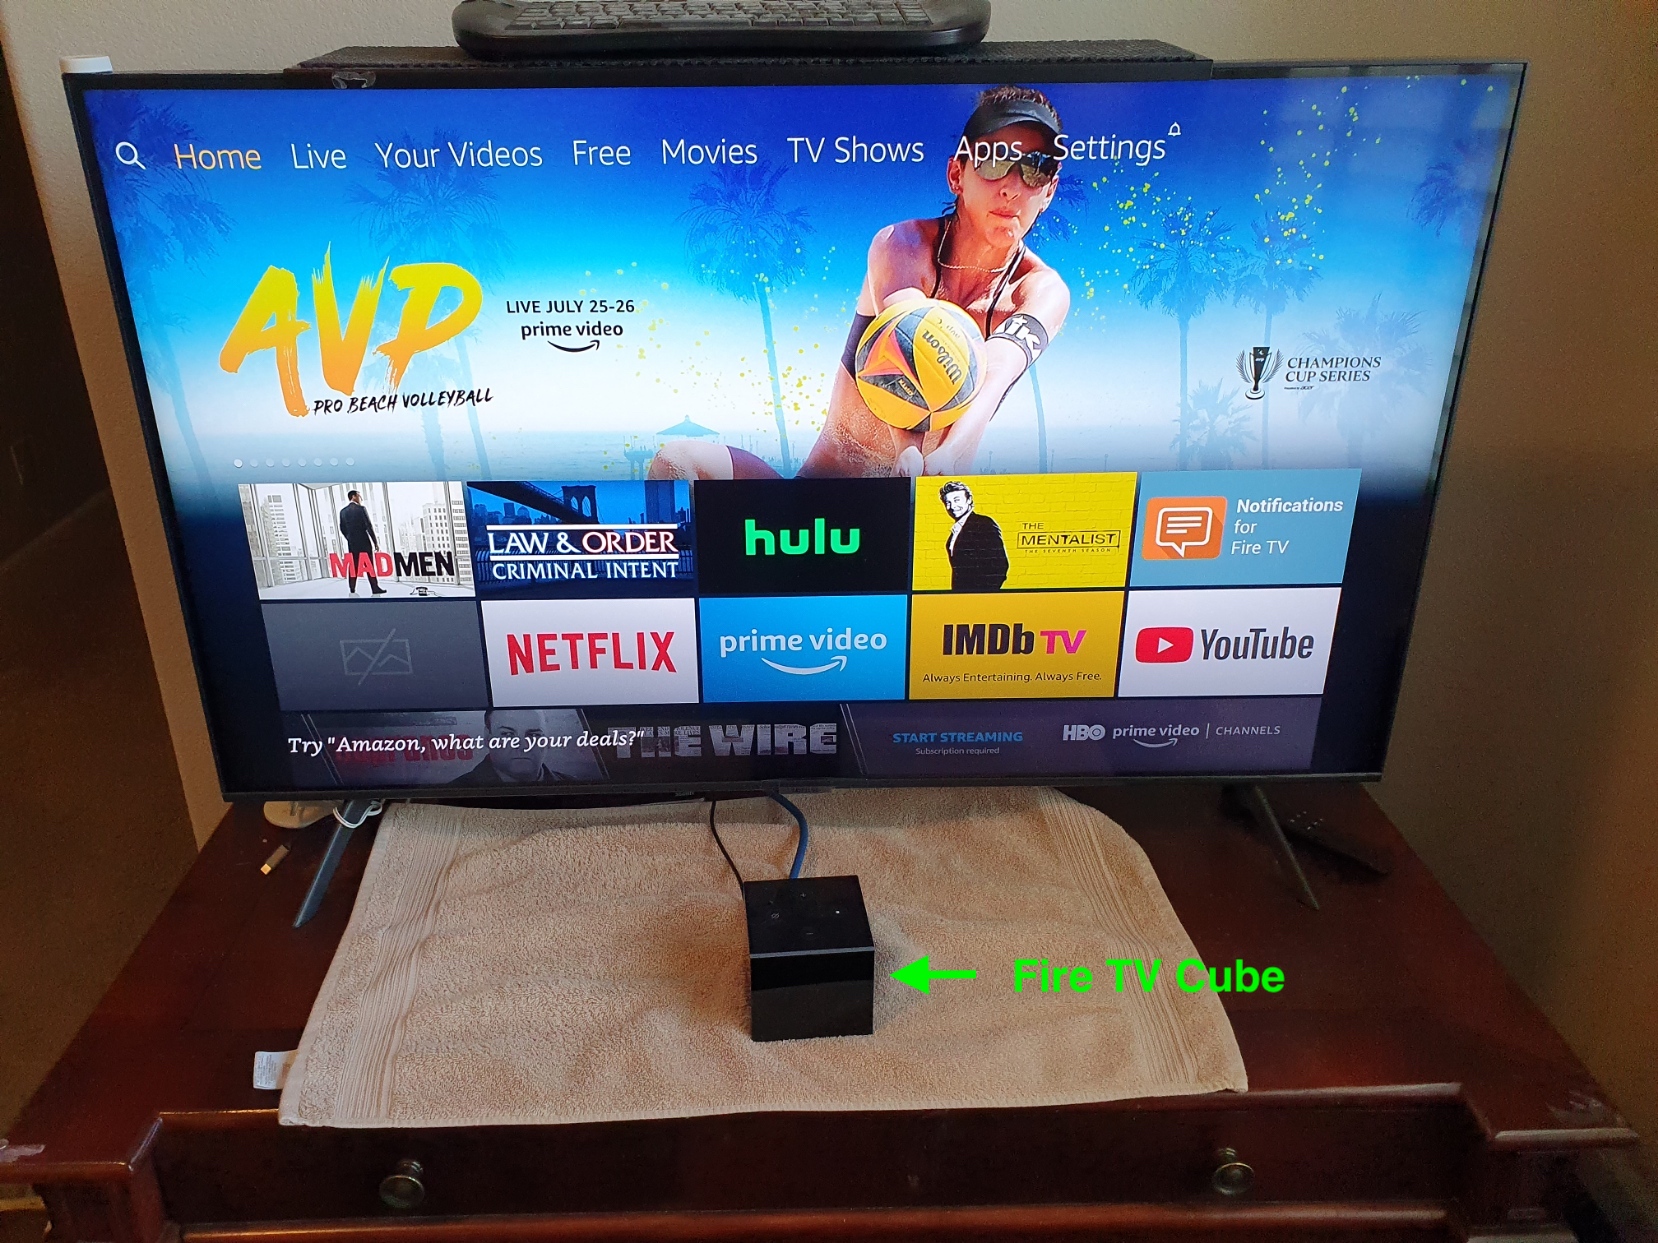 How to update the  Fire TV Stick and Fire TV Cube